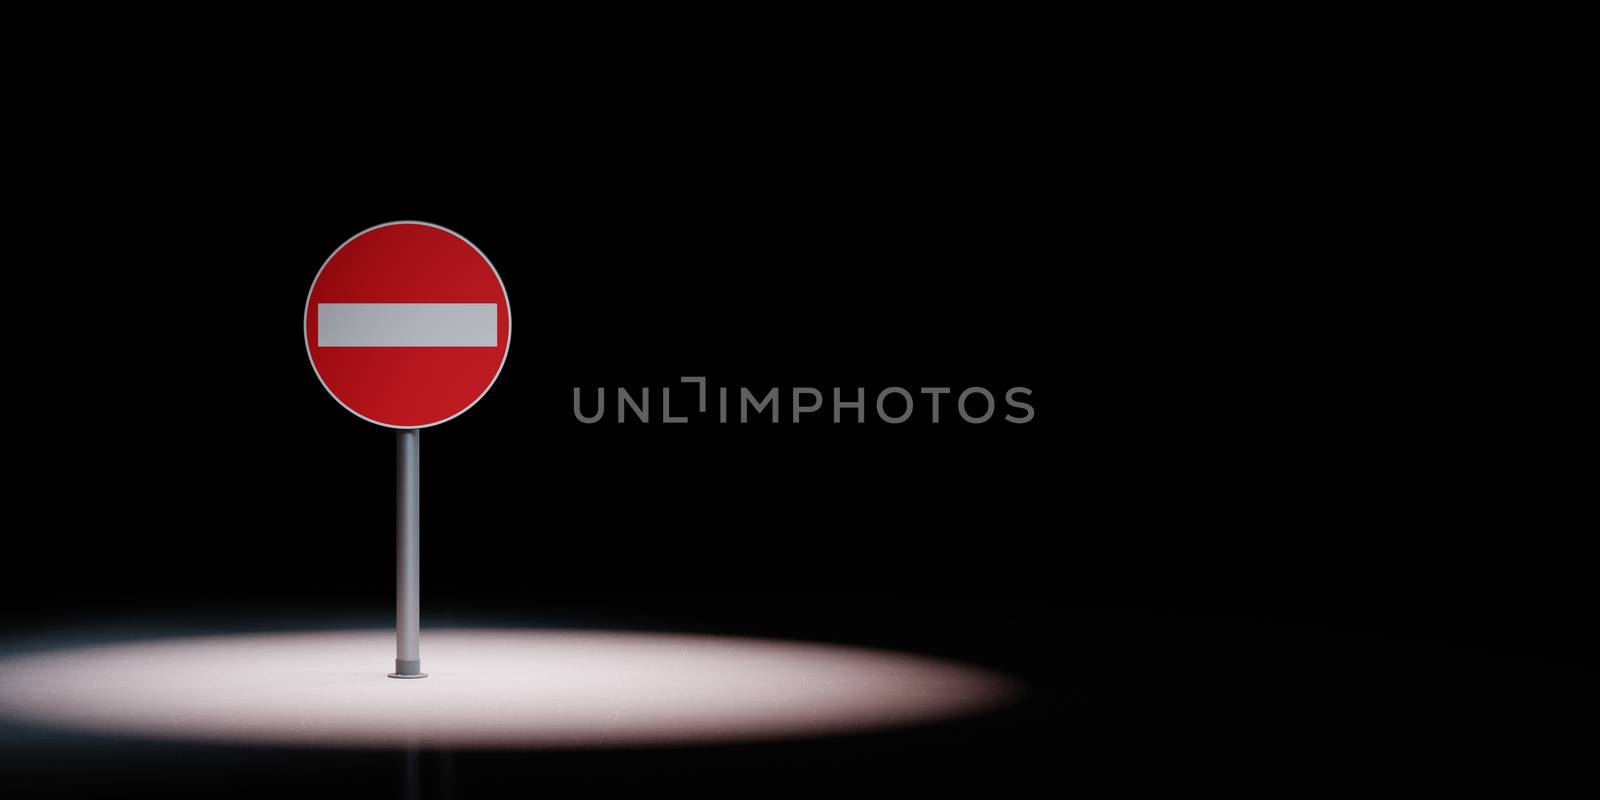 Access Denied Road Sign Spotlighted on Black Background with Copy Space 3D Illustration